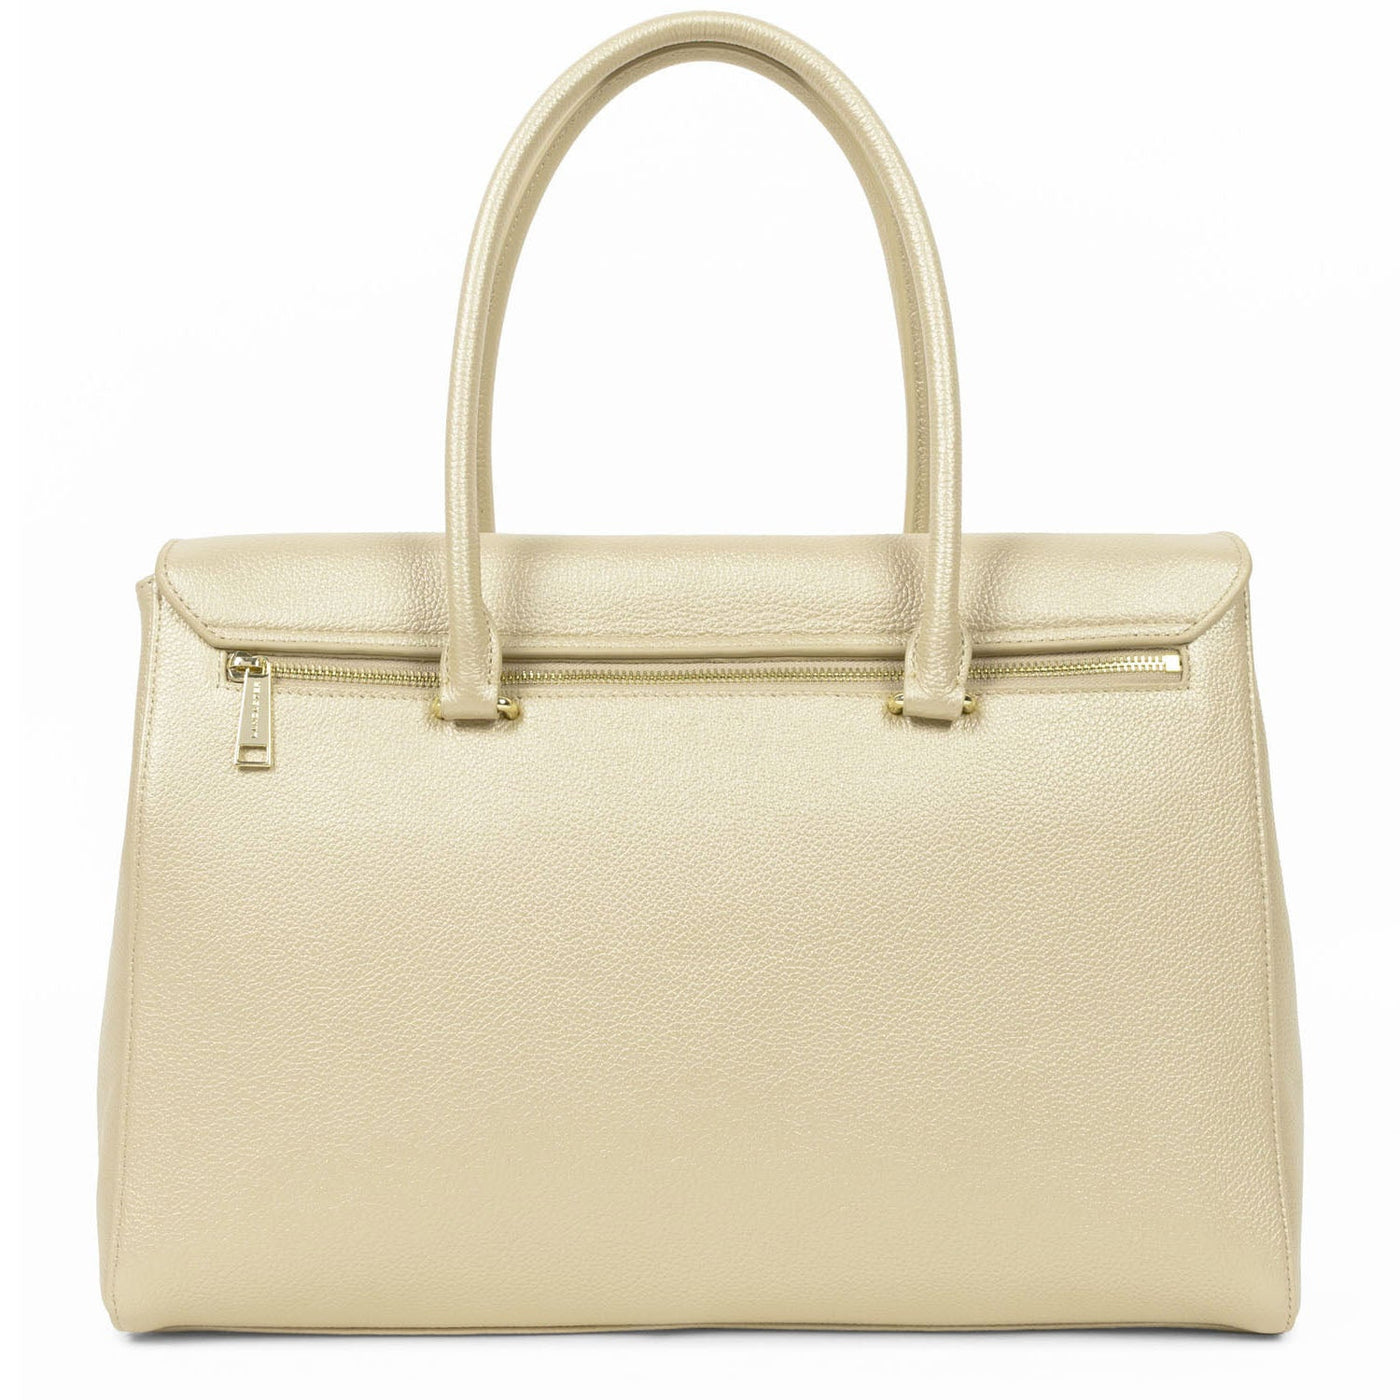 extra large tote bag - foulonné milano #couleur_champagne